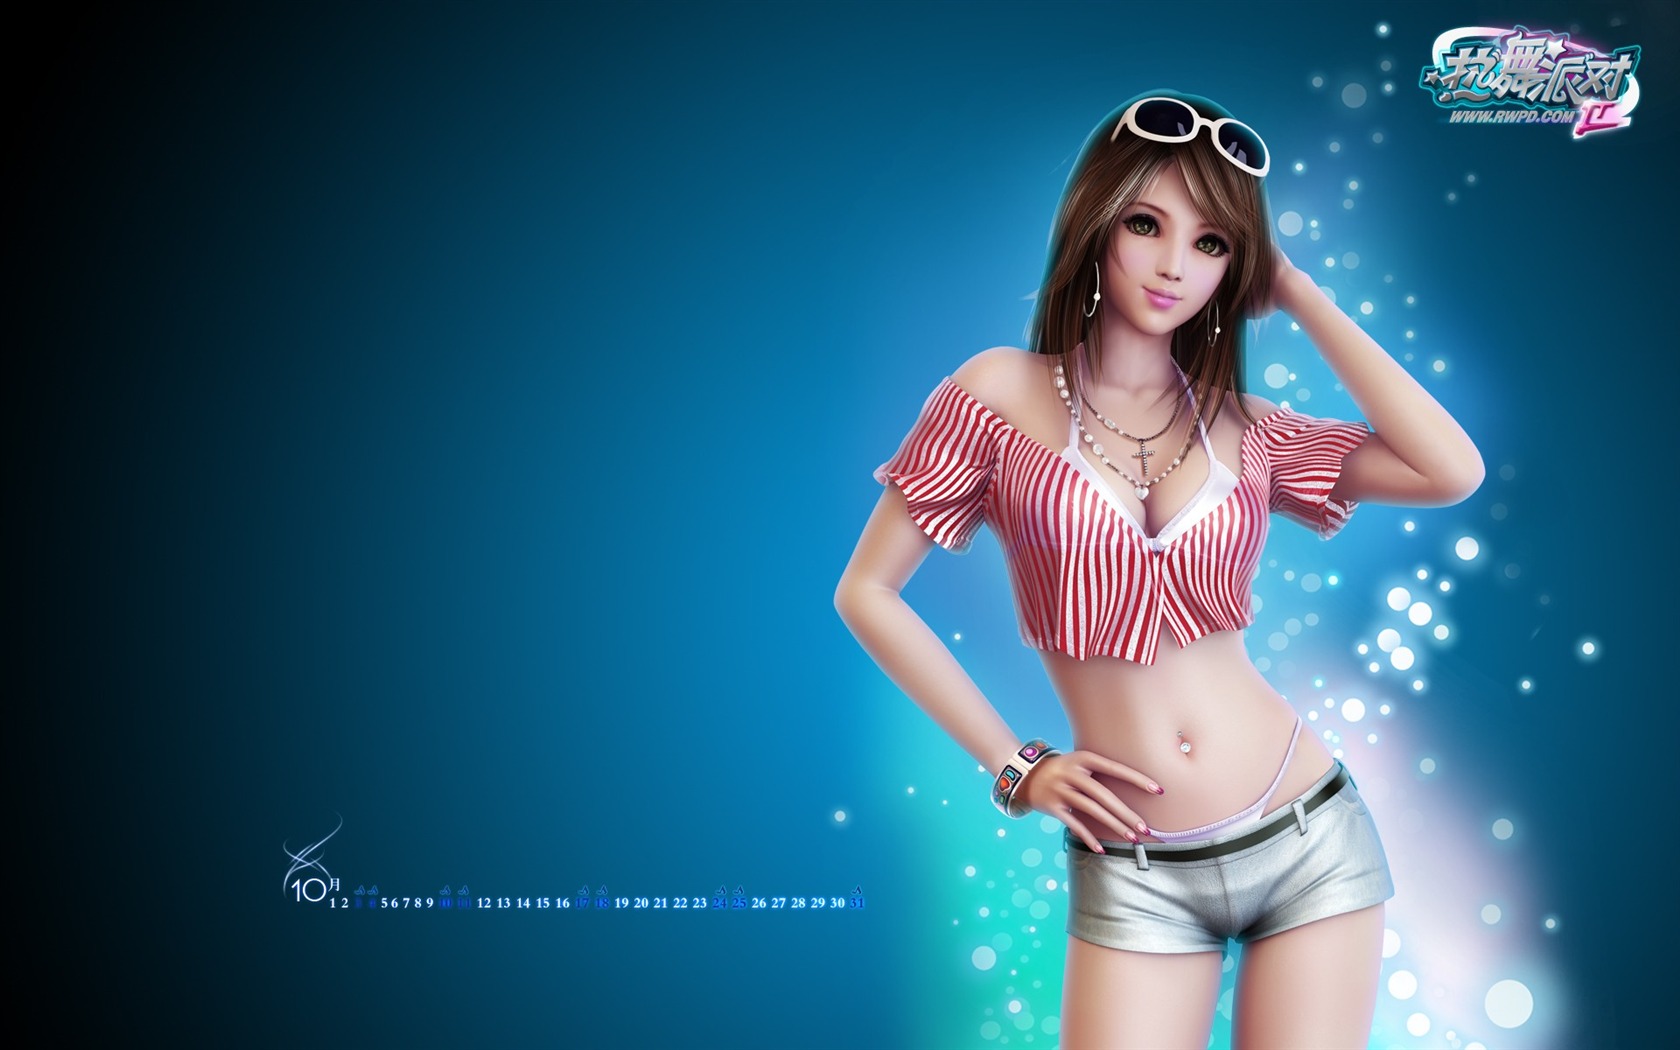 Online game Hot Dance Party II official wallpapers #4 - 1680x1050